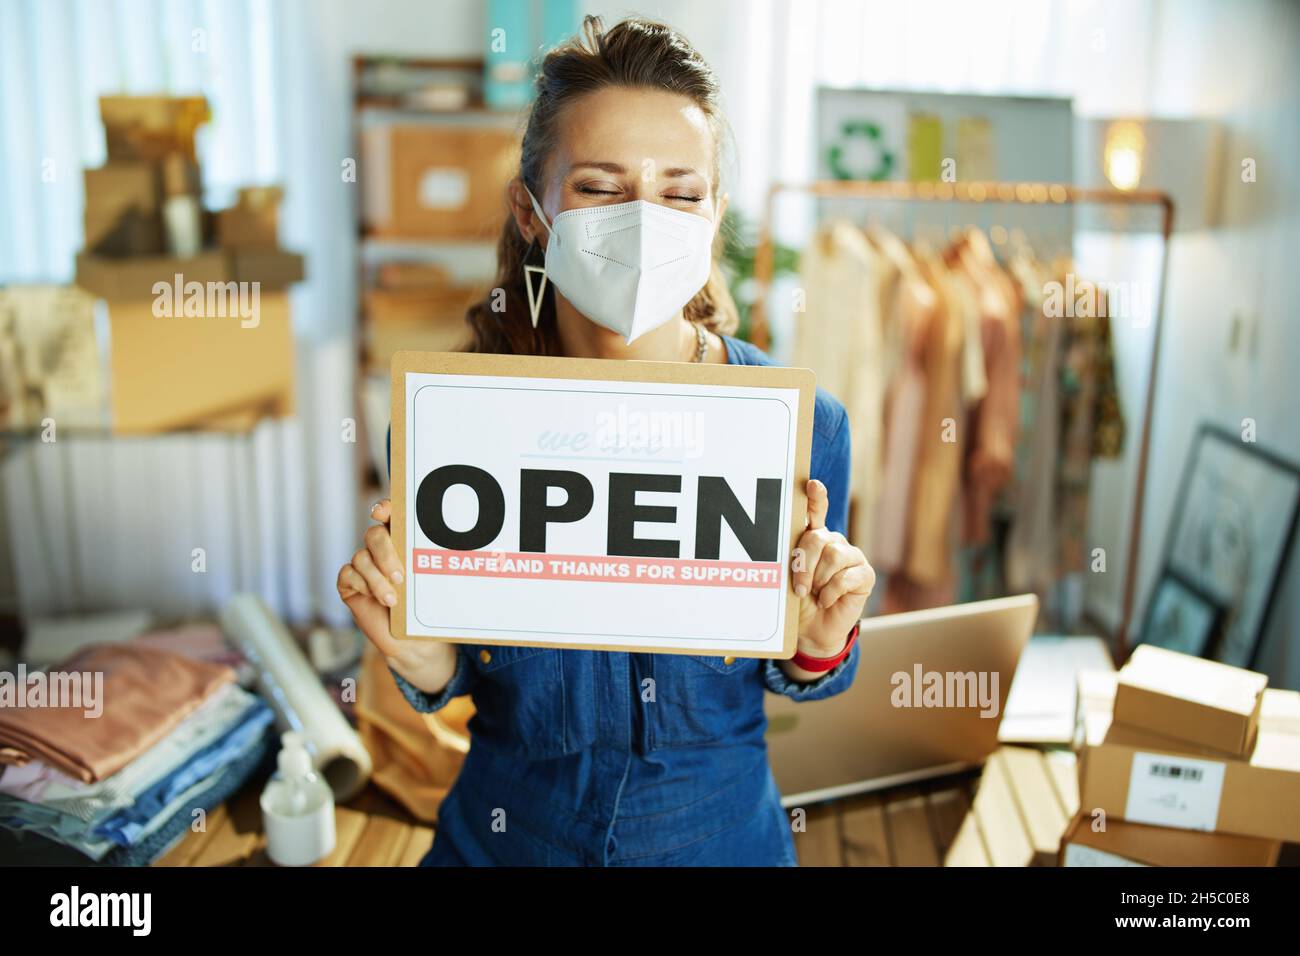 stylish 40 years old small business owner woman with ffp2 mask and open after covid sign in the office. Stock Photo